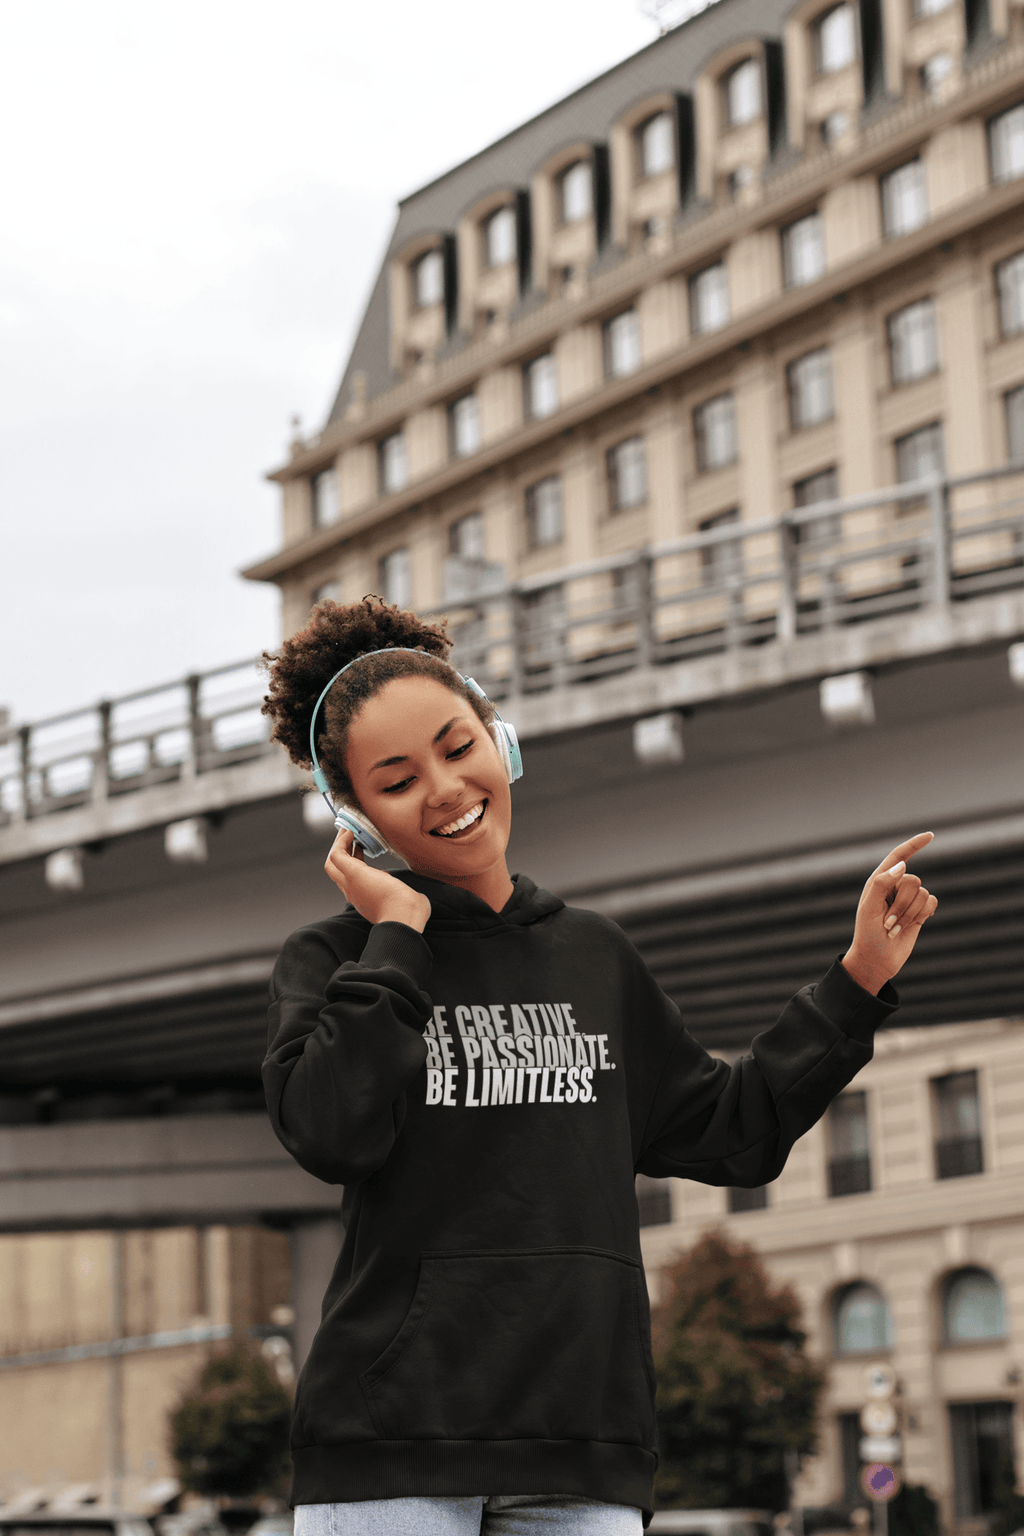 Be Creative. Be Passionate. Be Limitless. Hoodie - Women Empowerment T-Shirts & Apparel | CP Designs Unlimited